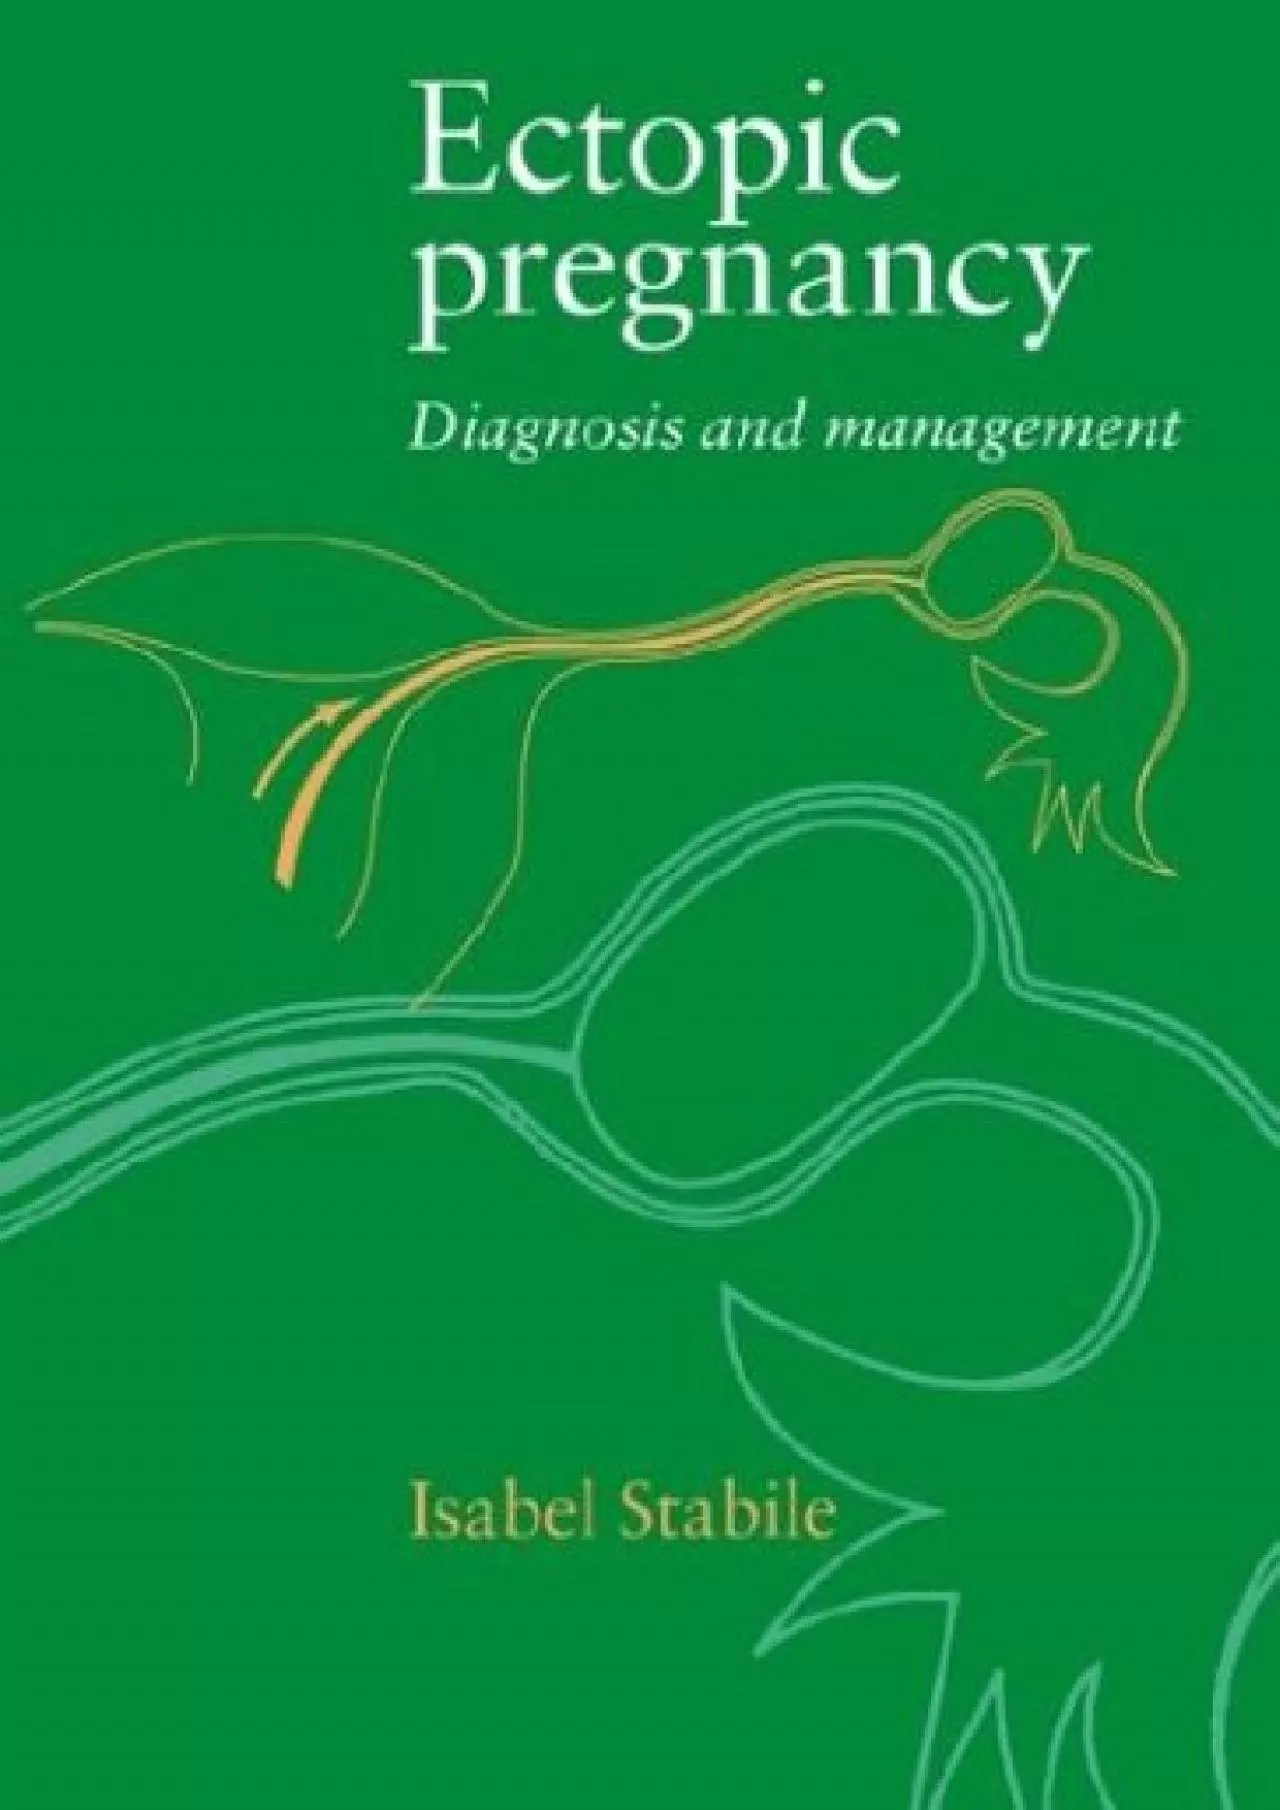 (EBOOK)-Ectopic Pregnancy: Diagnosis and Management